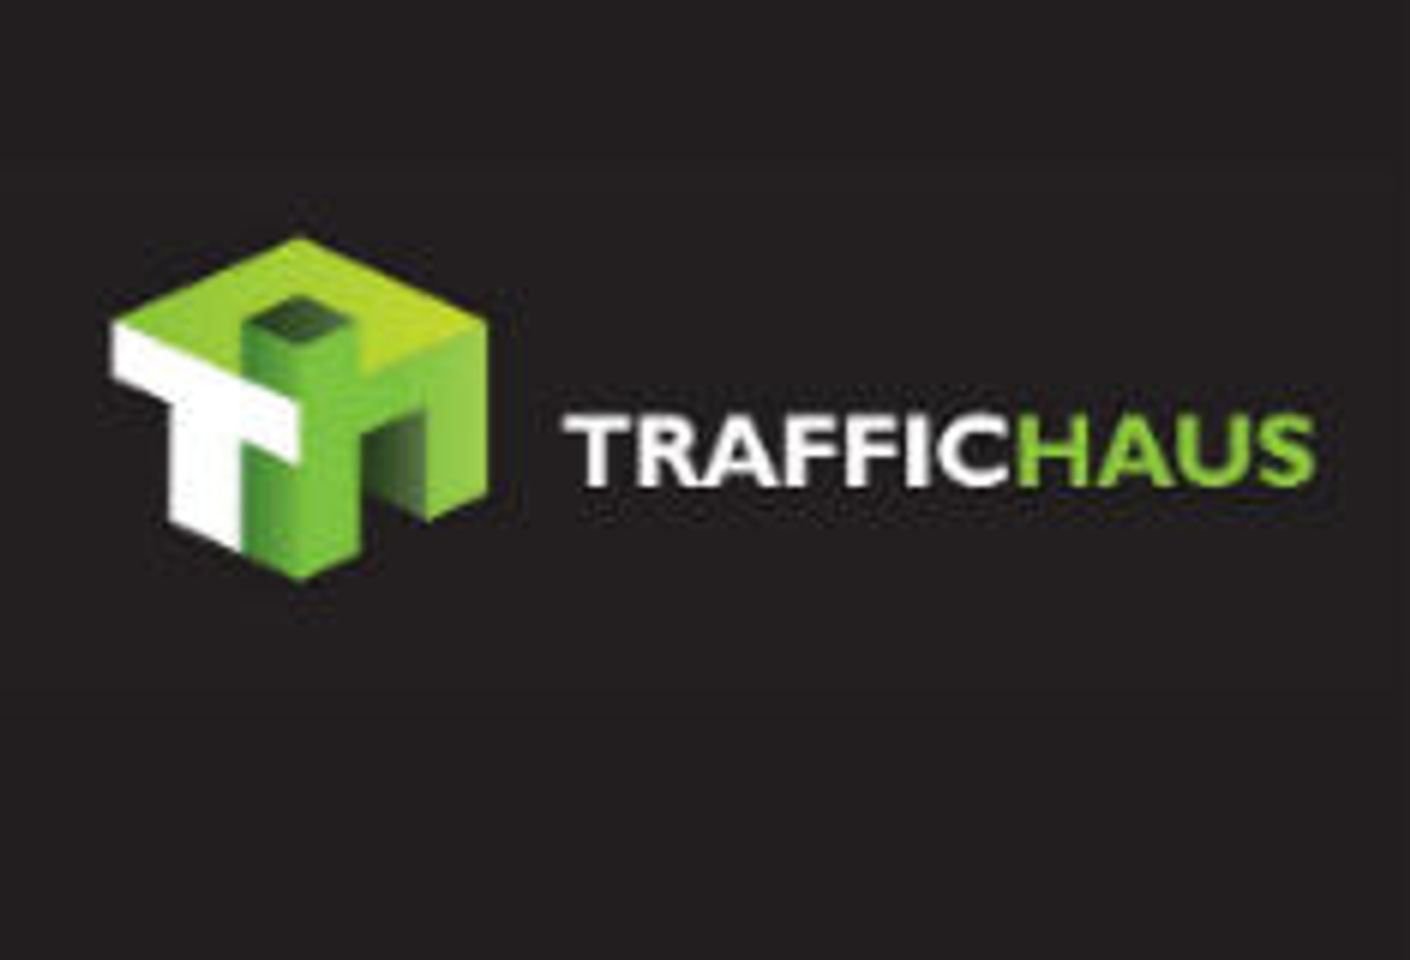 TrafficHaus Attending European Summit To Debut Suite of Innovative Technologies